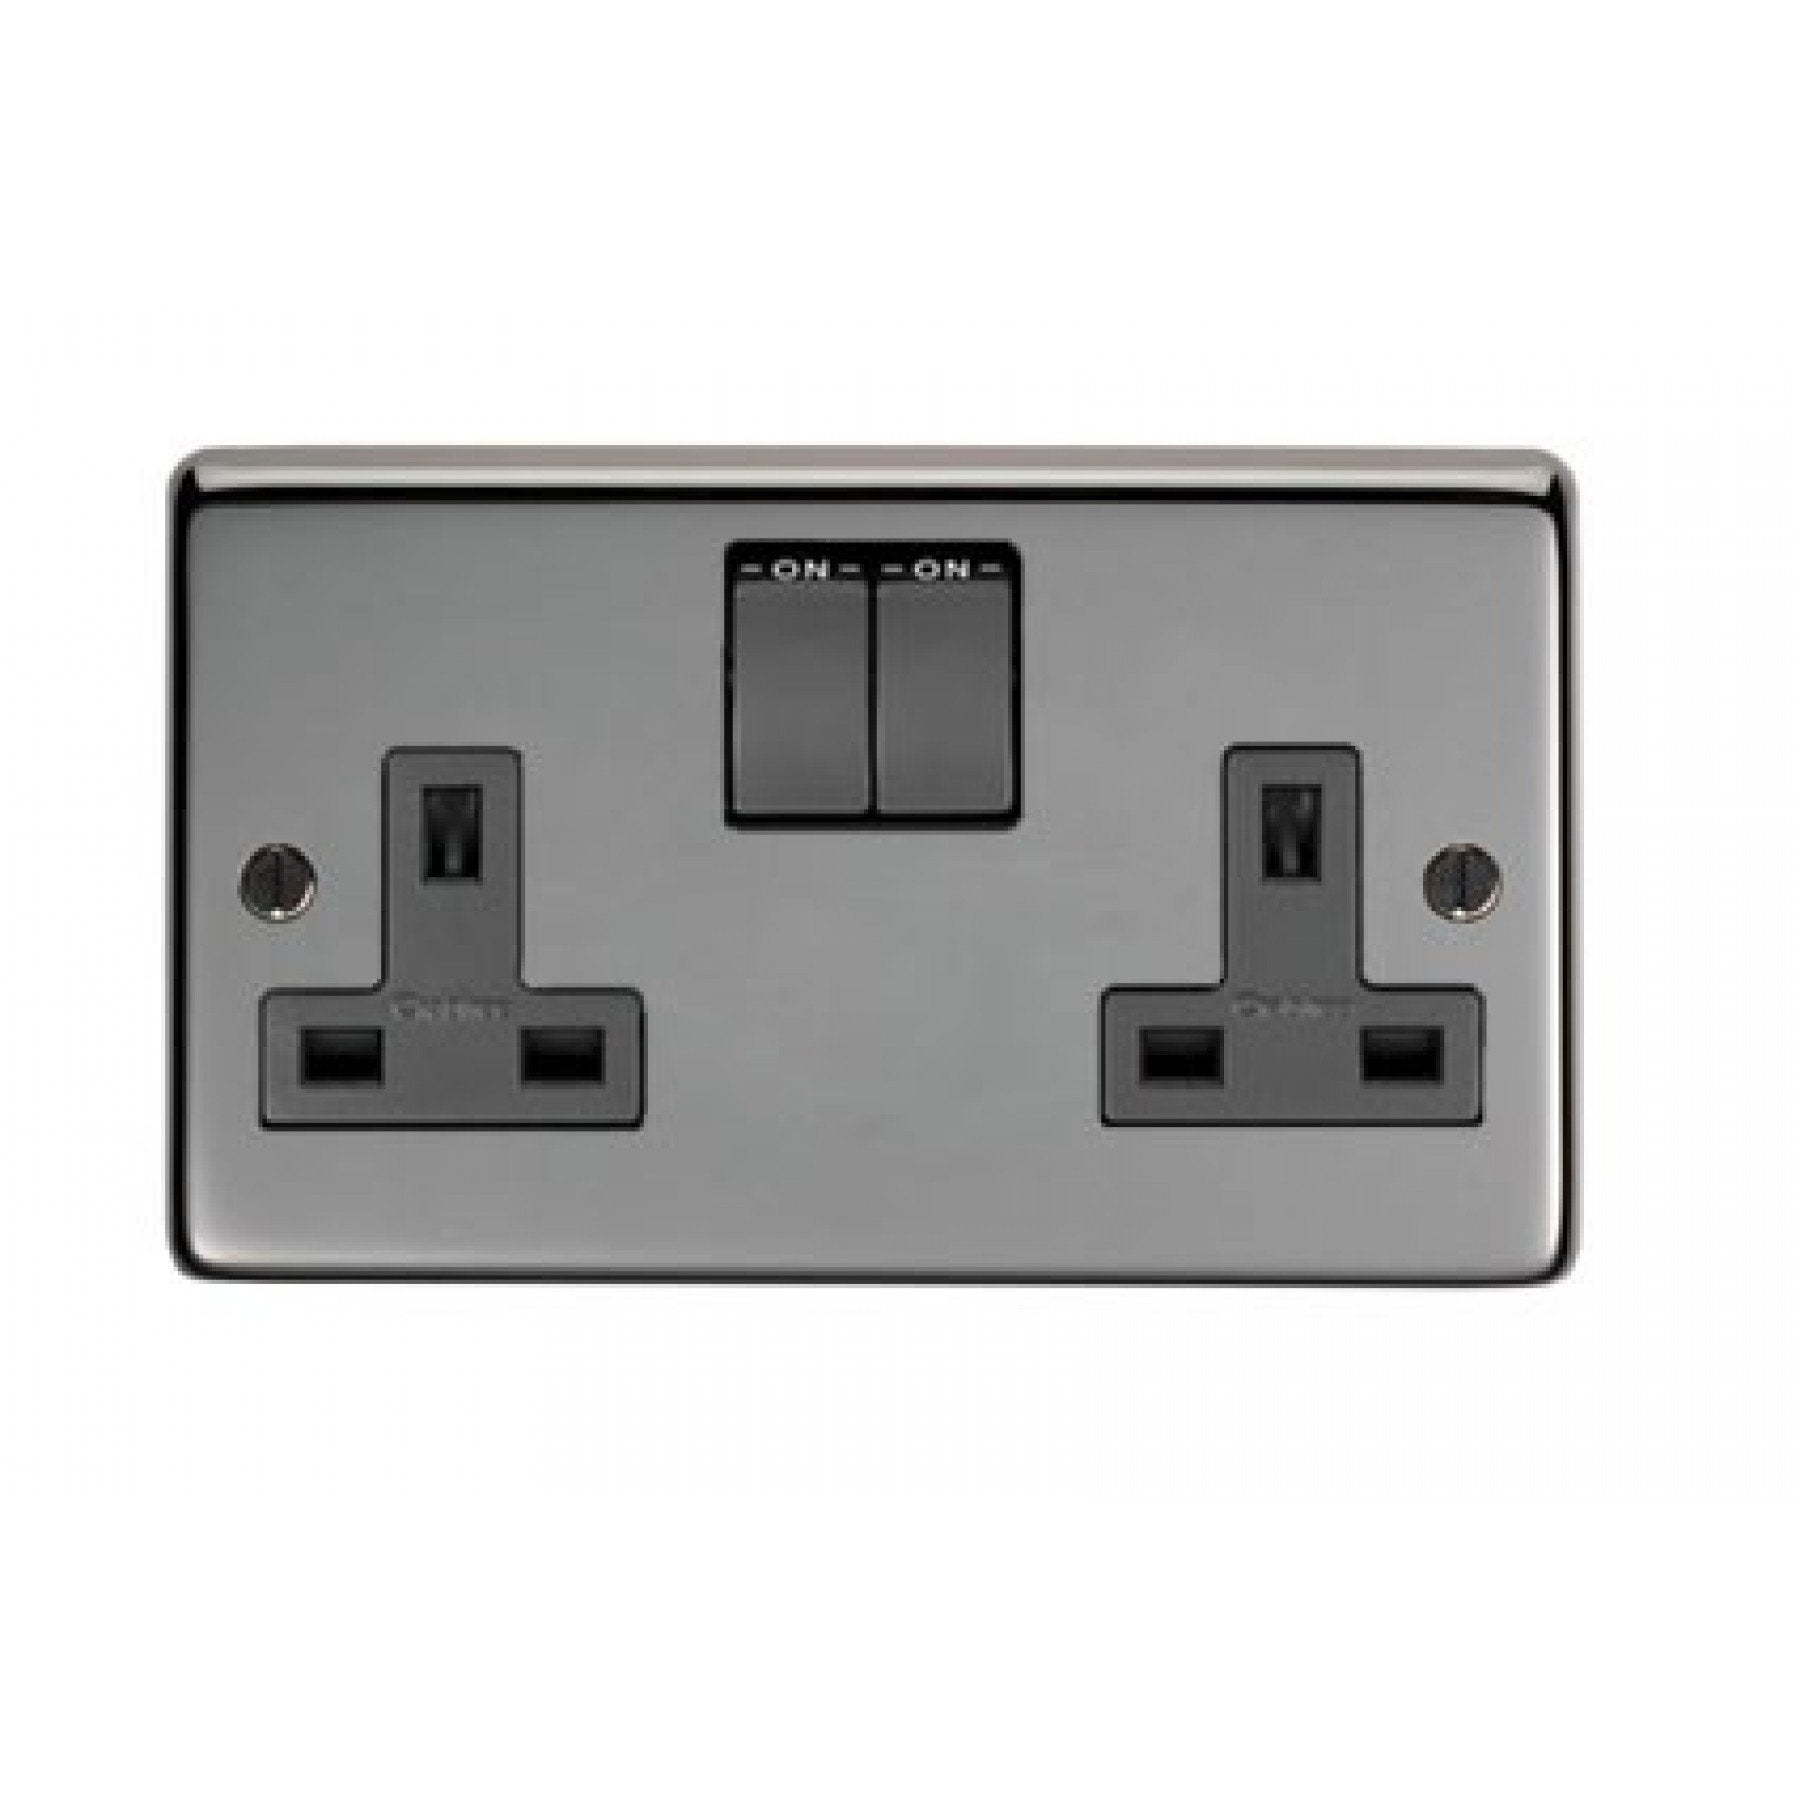 From the Anvil BN Double 13 Amp Switched Socket